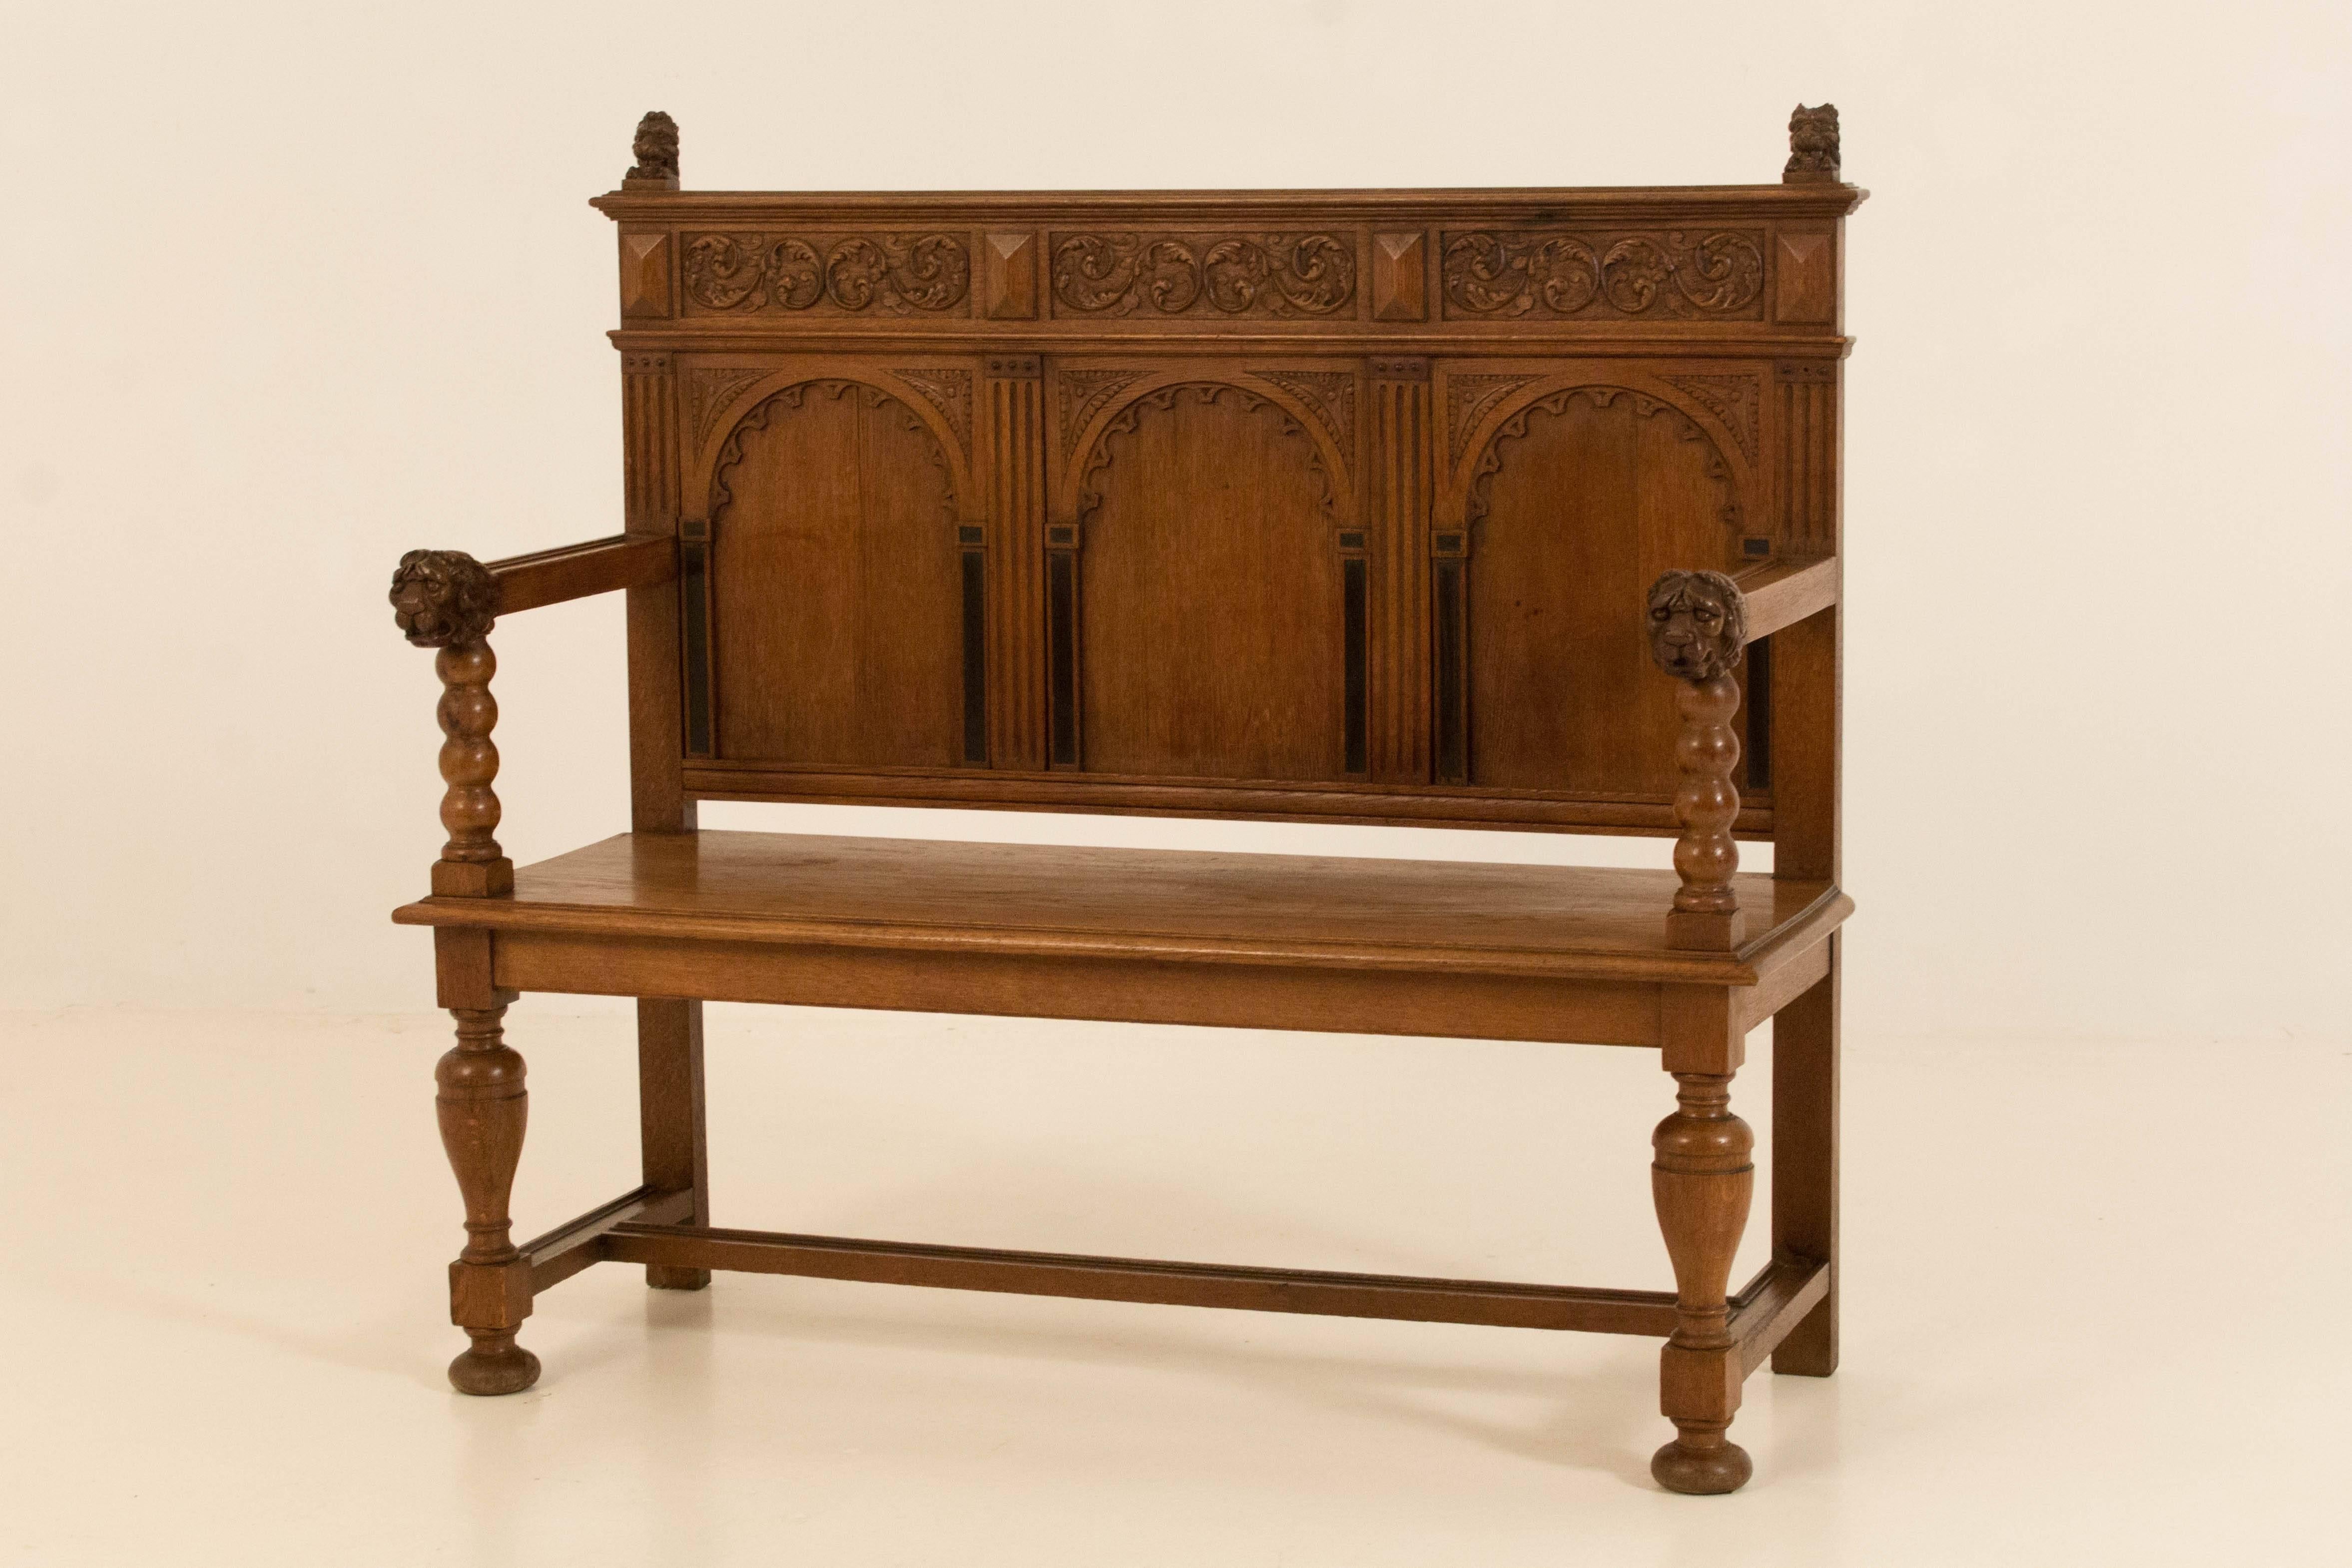 Dutch neo Renaissance carved hall bench, 1900s.
Solid oak with nicely carved armrests.
In good original condition with minor wear consistent with age and use,
preserving a beautiful patina.